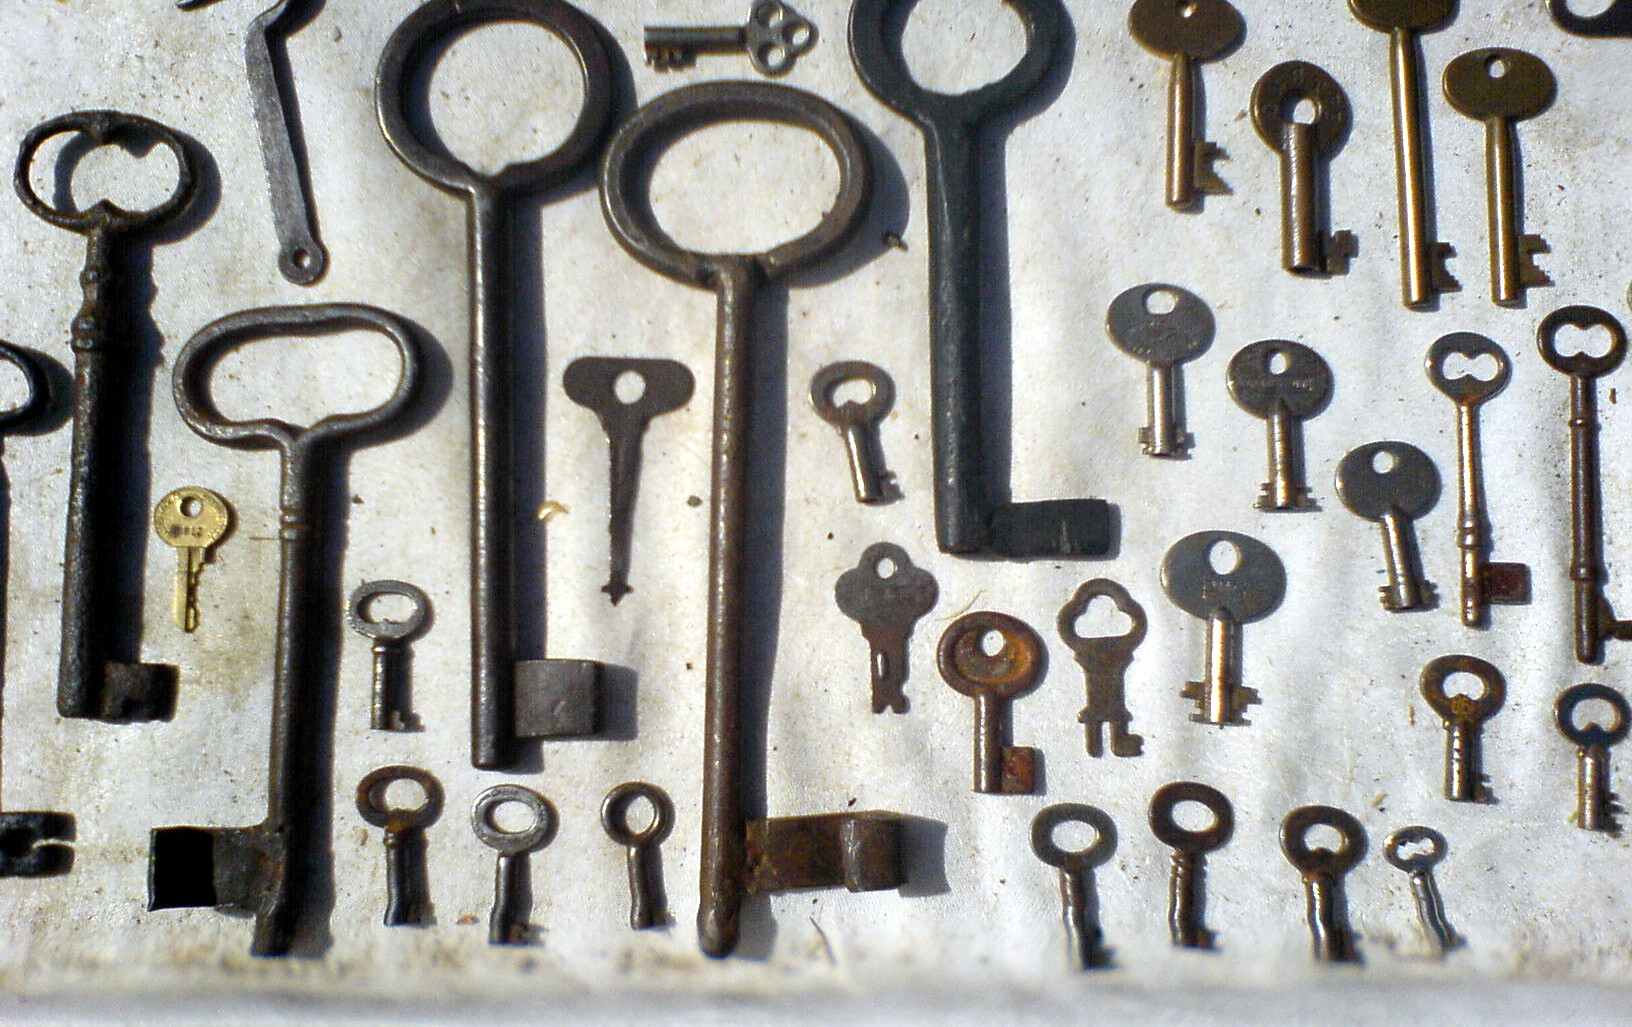 A selection of old keys